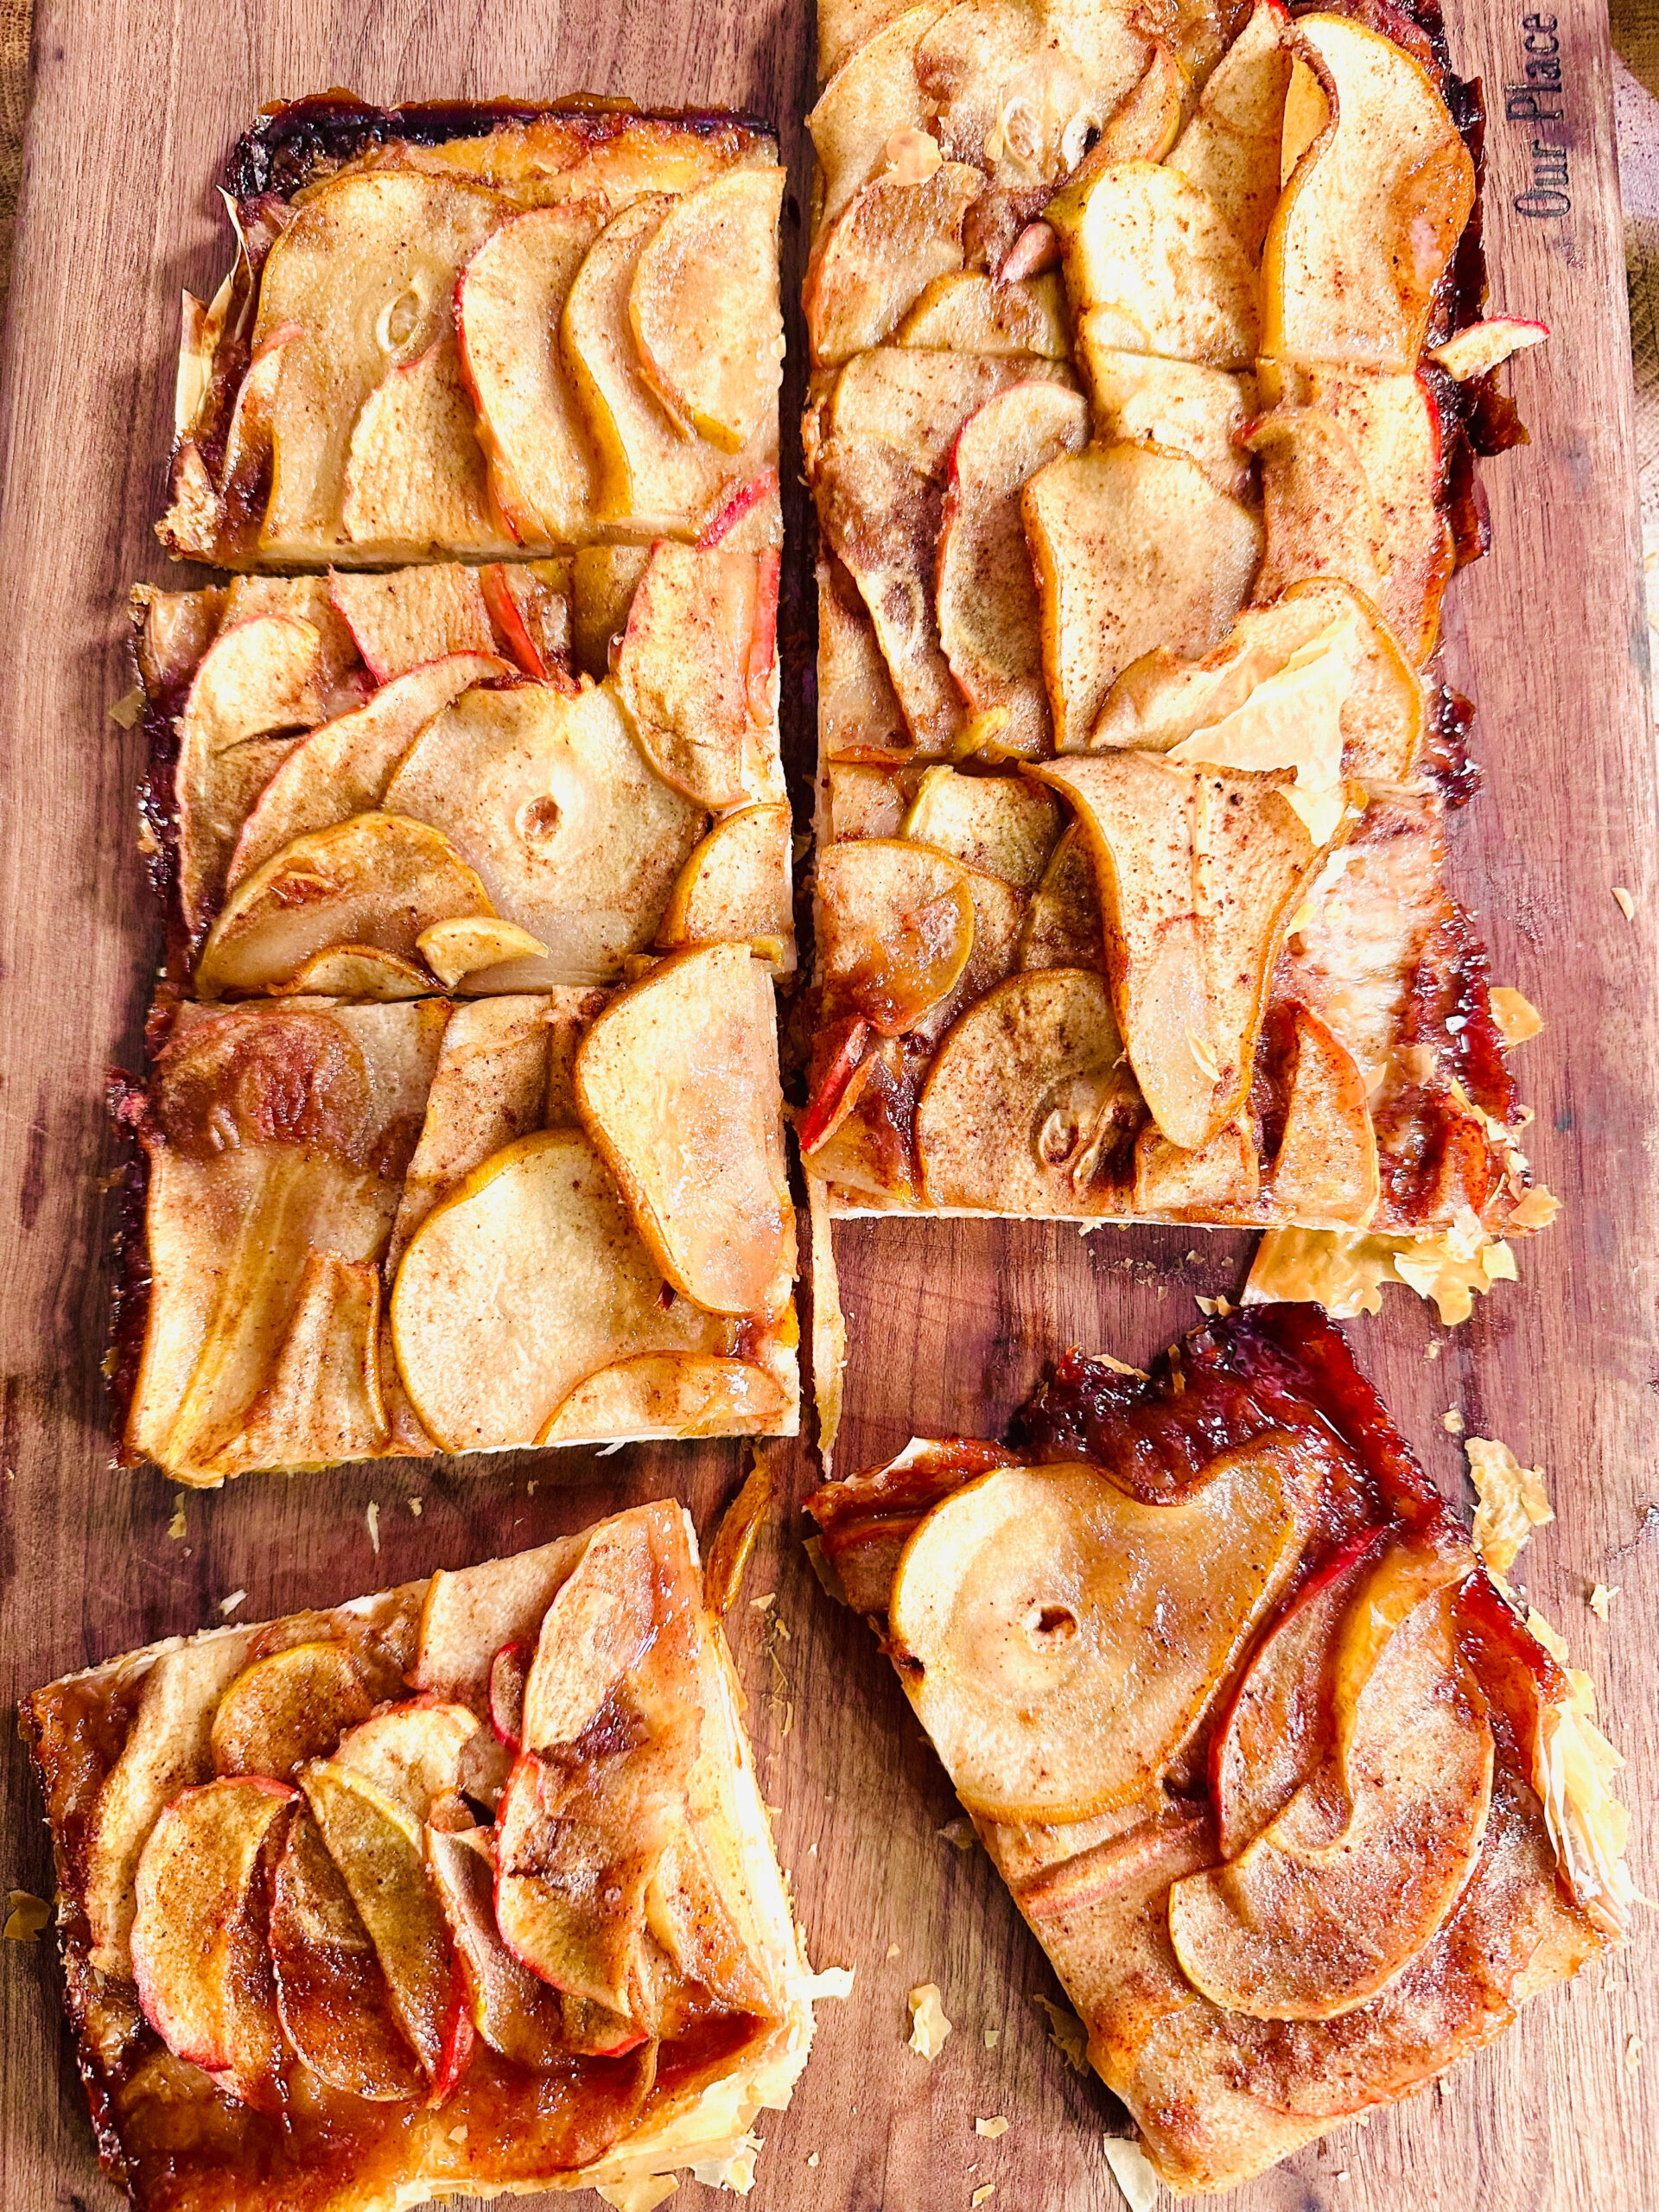 Will Coleman’s Whiskey Pear and Apple Tart